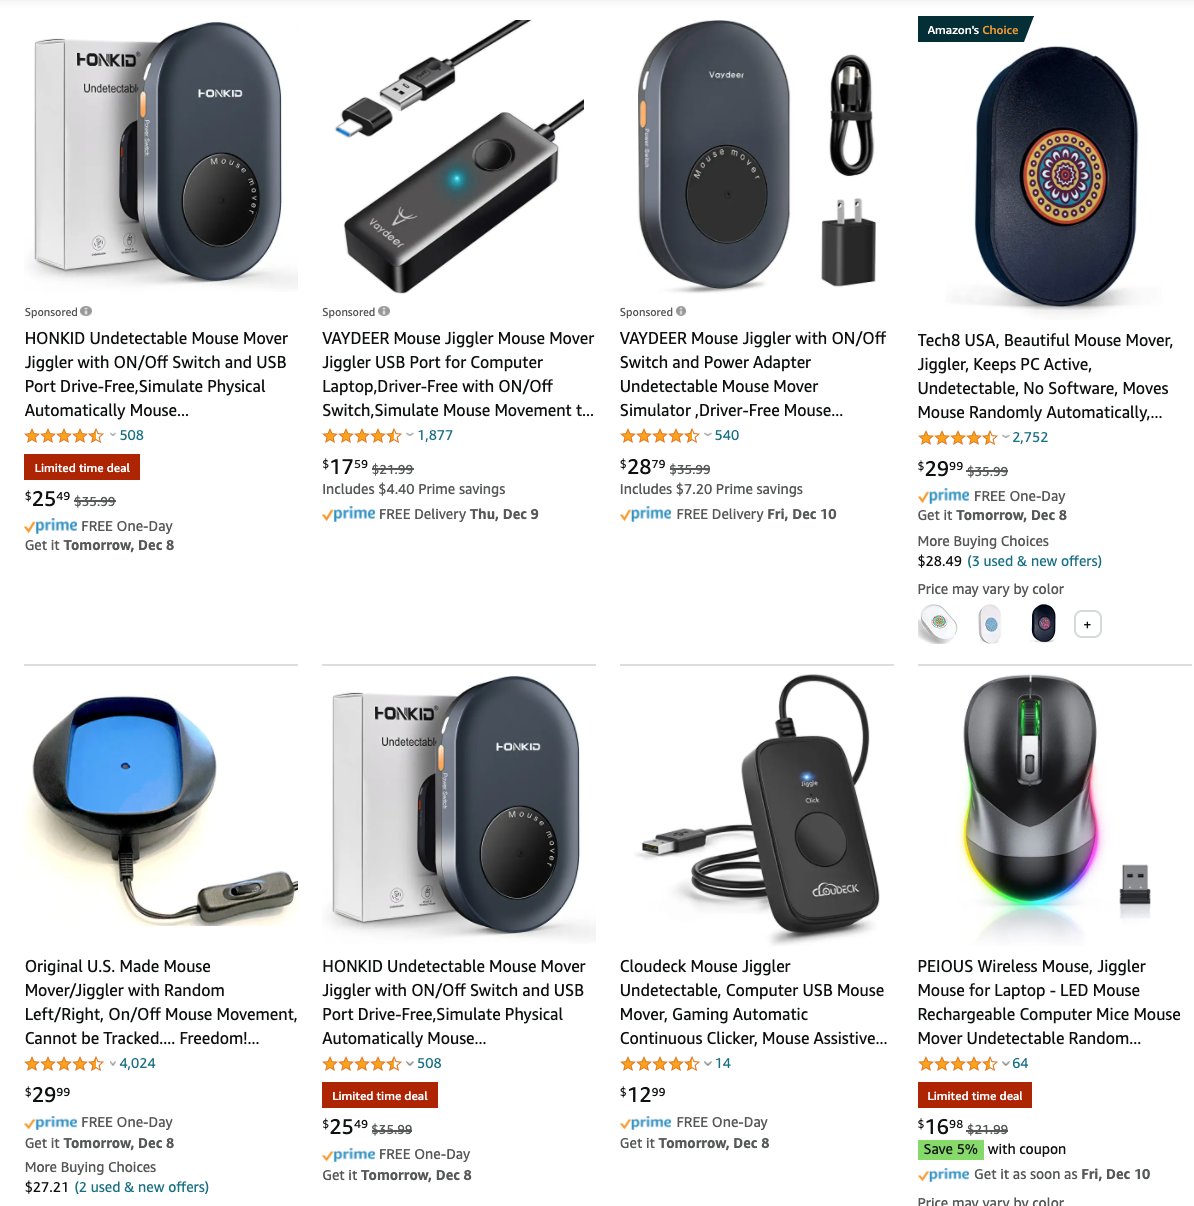 Screenshot of Amazon mouse mover listings